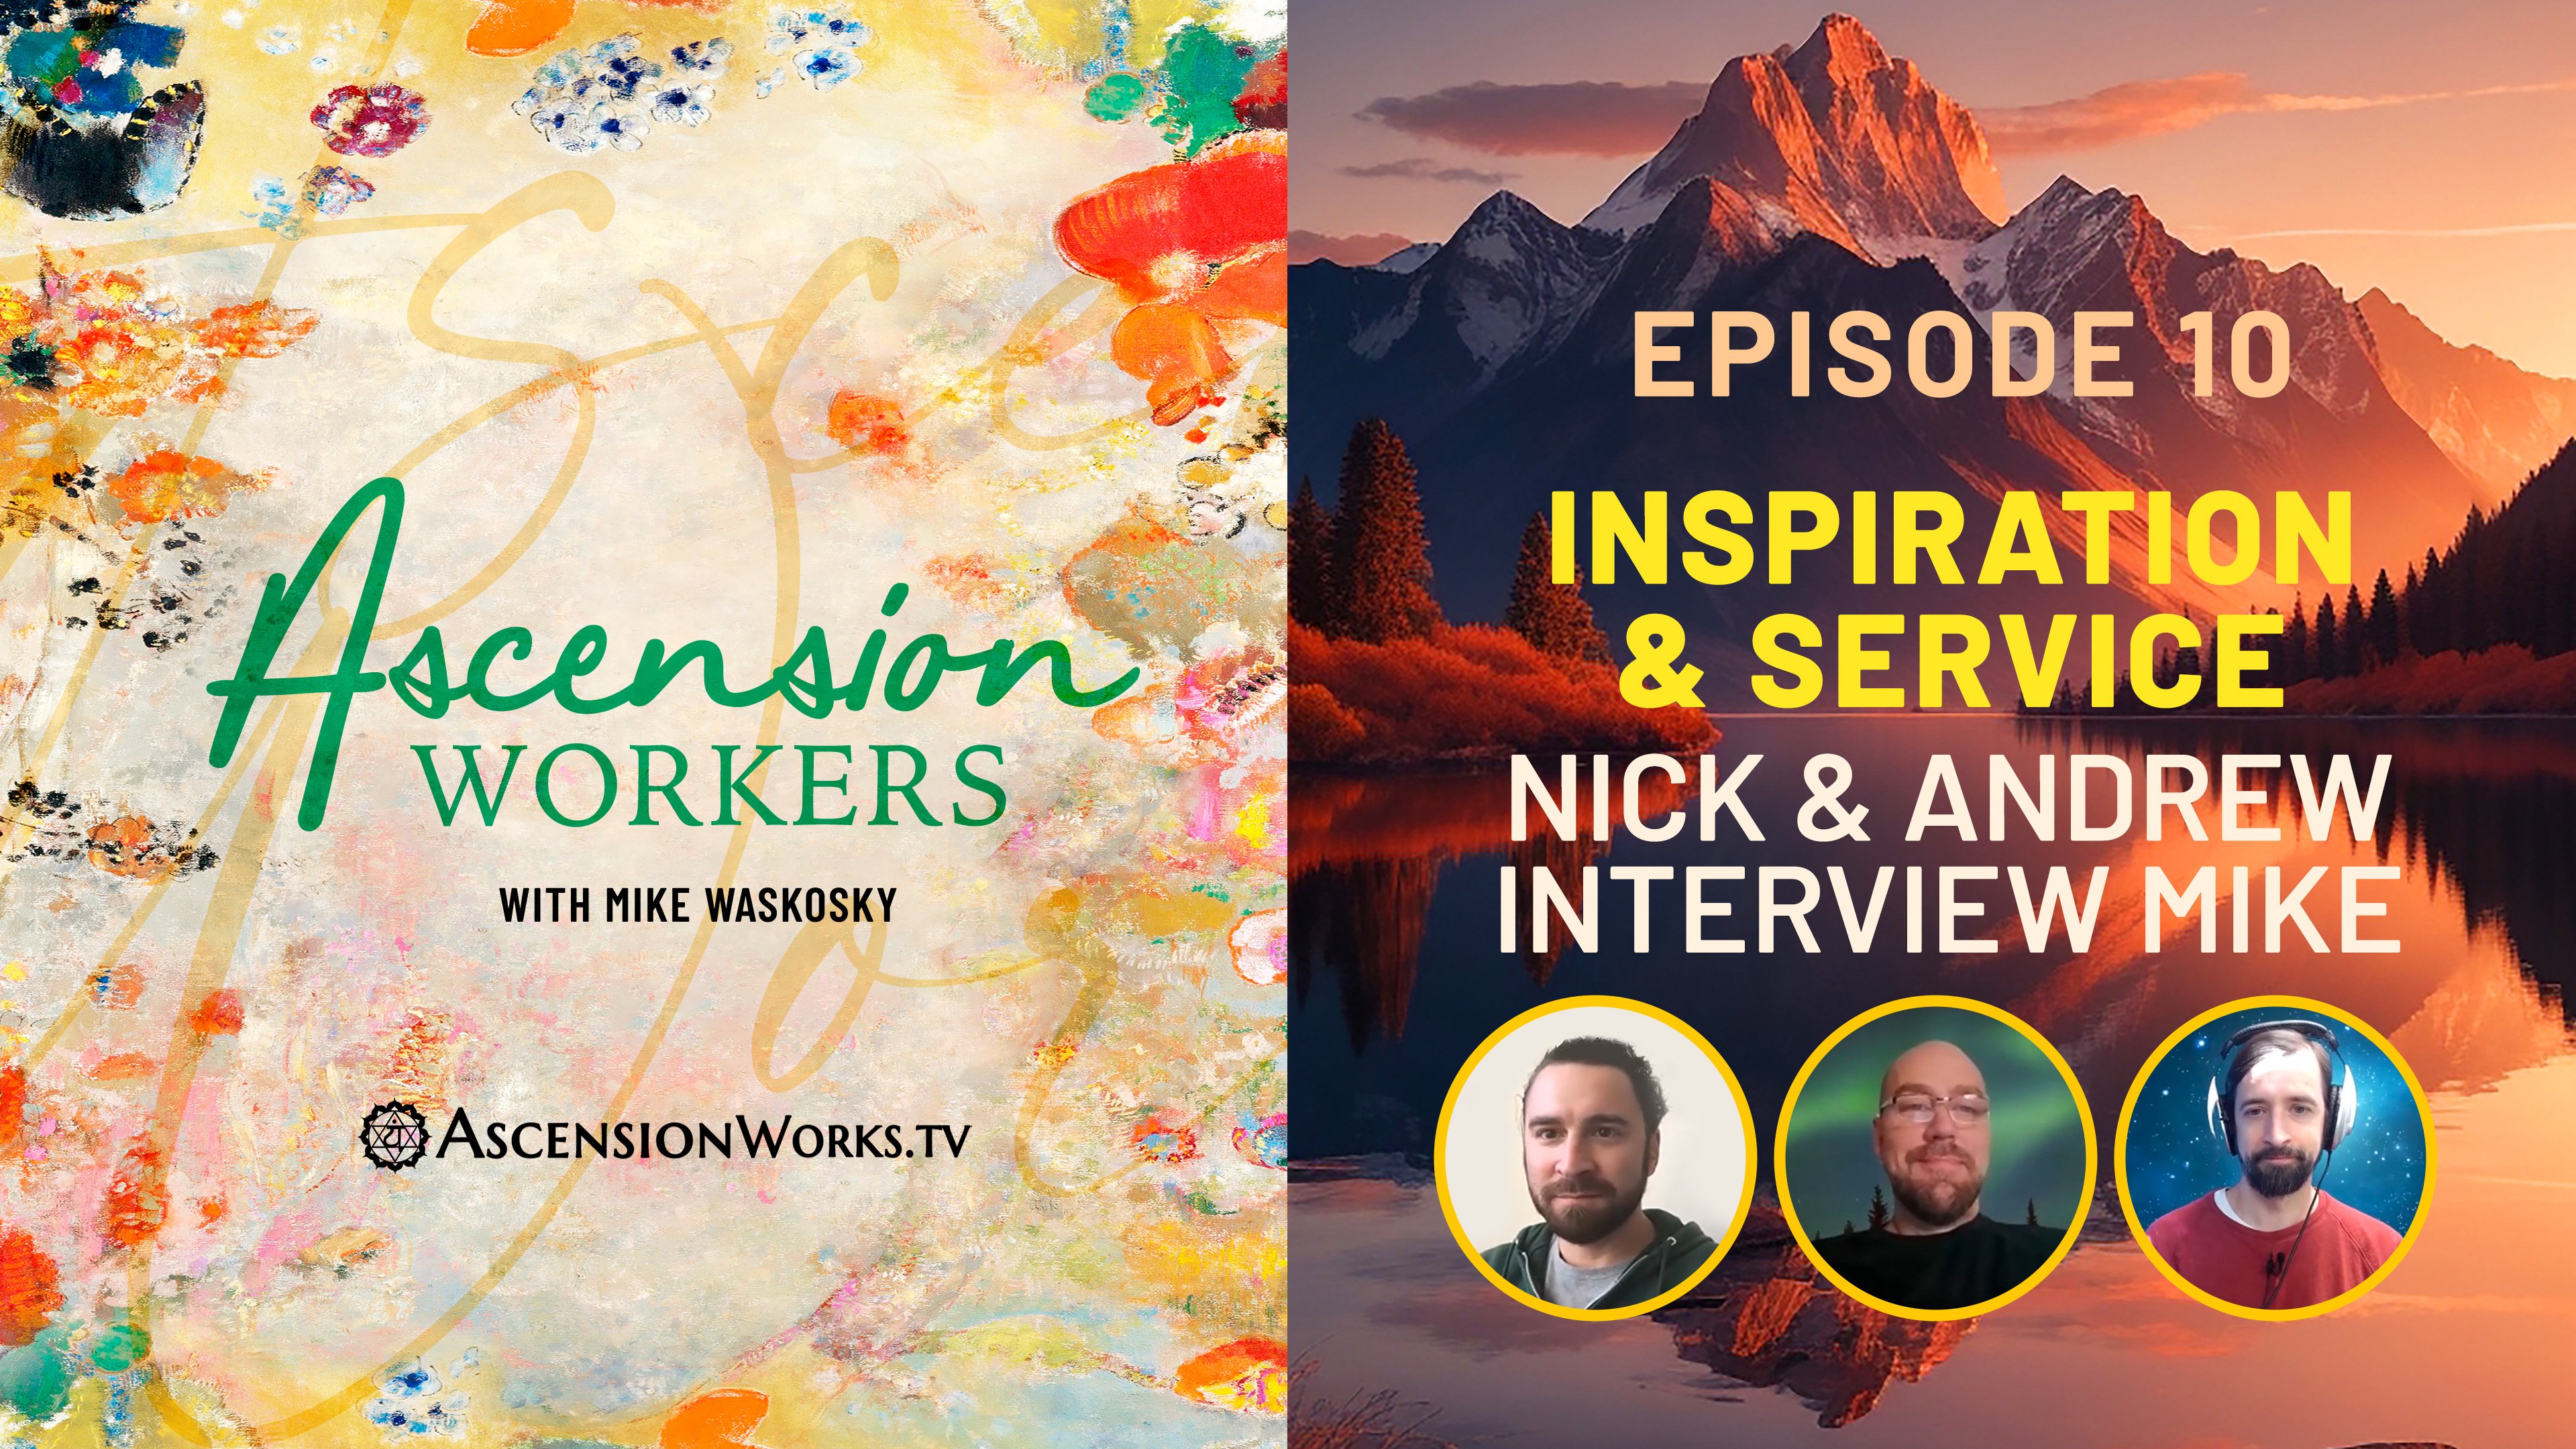 Episode 10 Ascension Workers Live: Inspiration & Service - Nick and Andrew Interview Mike Waskosky